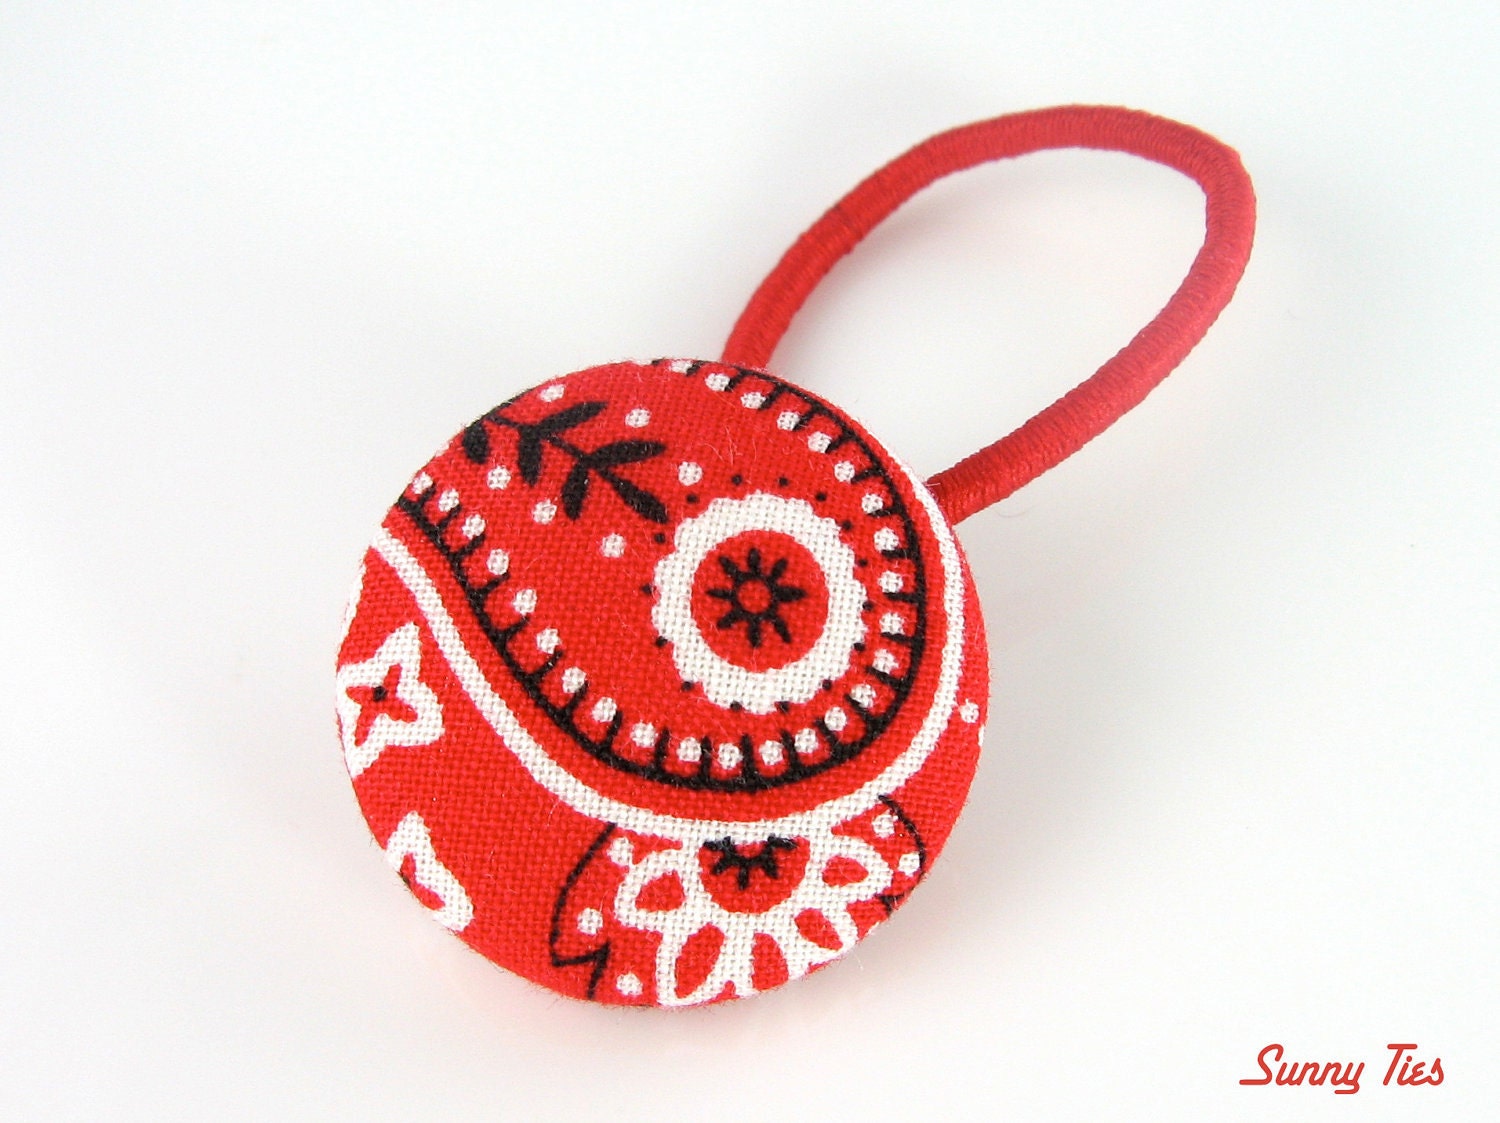 Cowgirl Button Hair Tie in Red Bandana Print - Toddler Big Girls - Hair Tie Ouchless Hair Accessories - SunnyTies